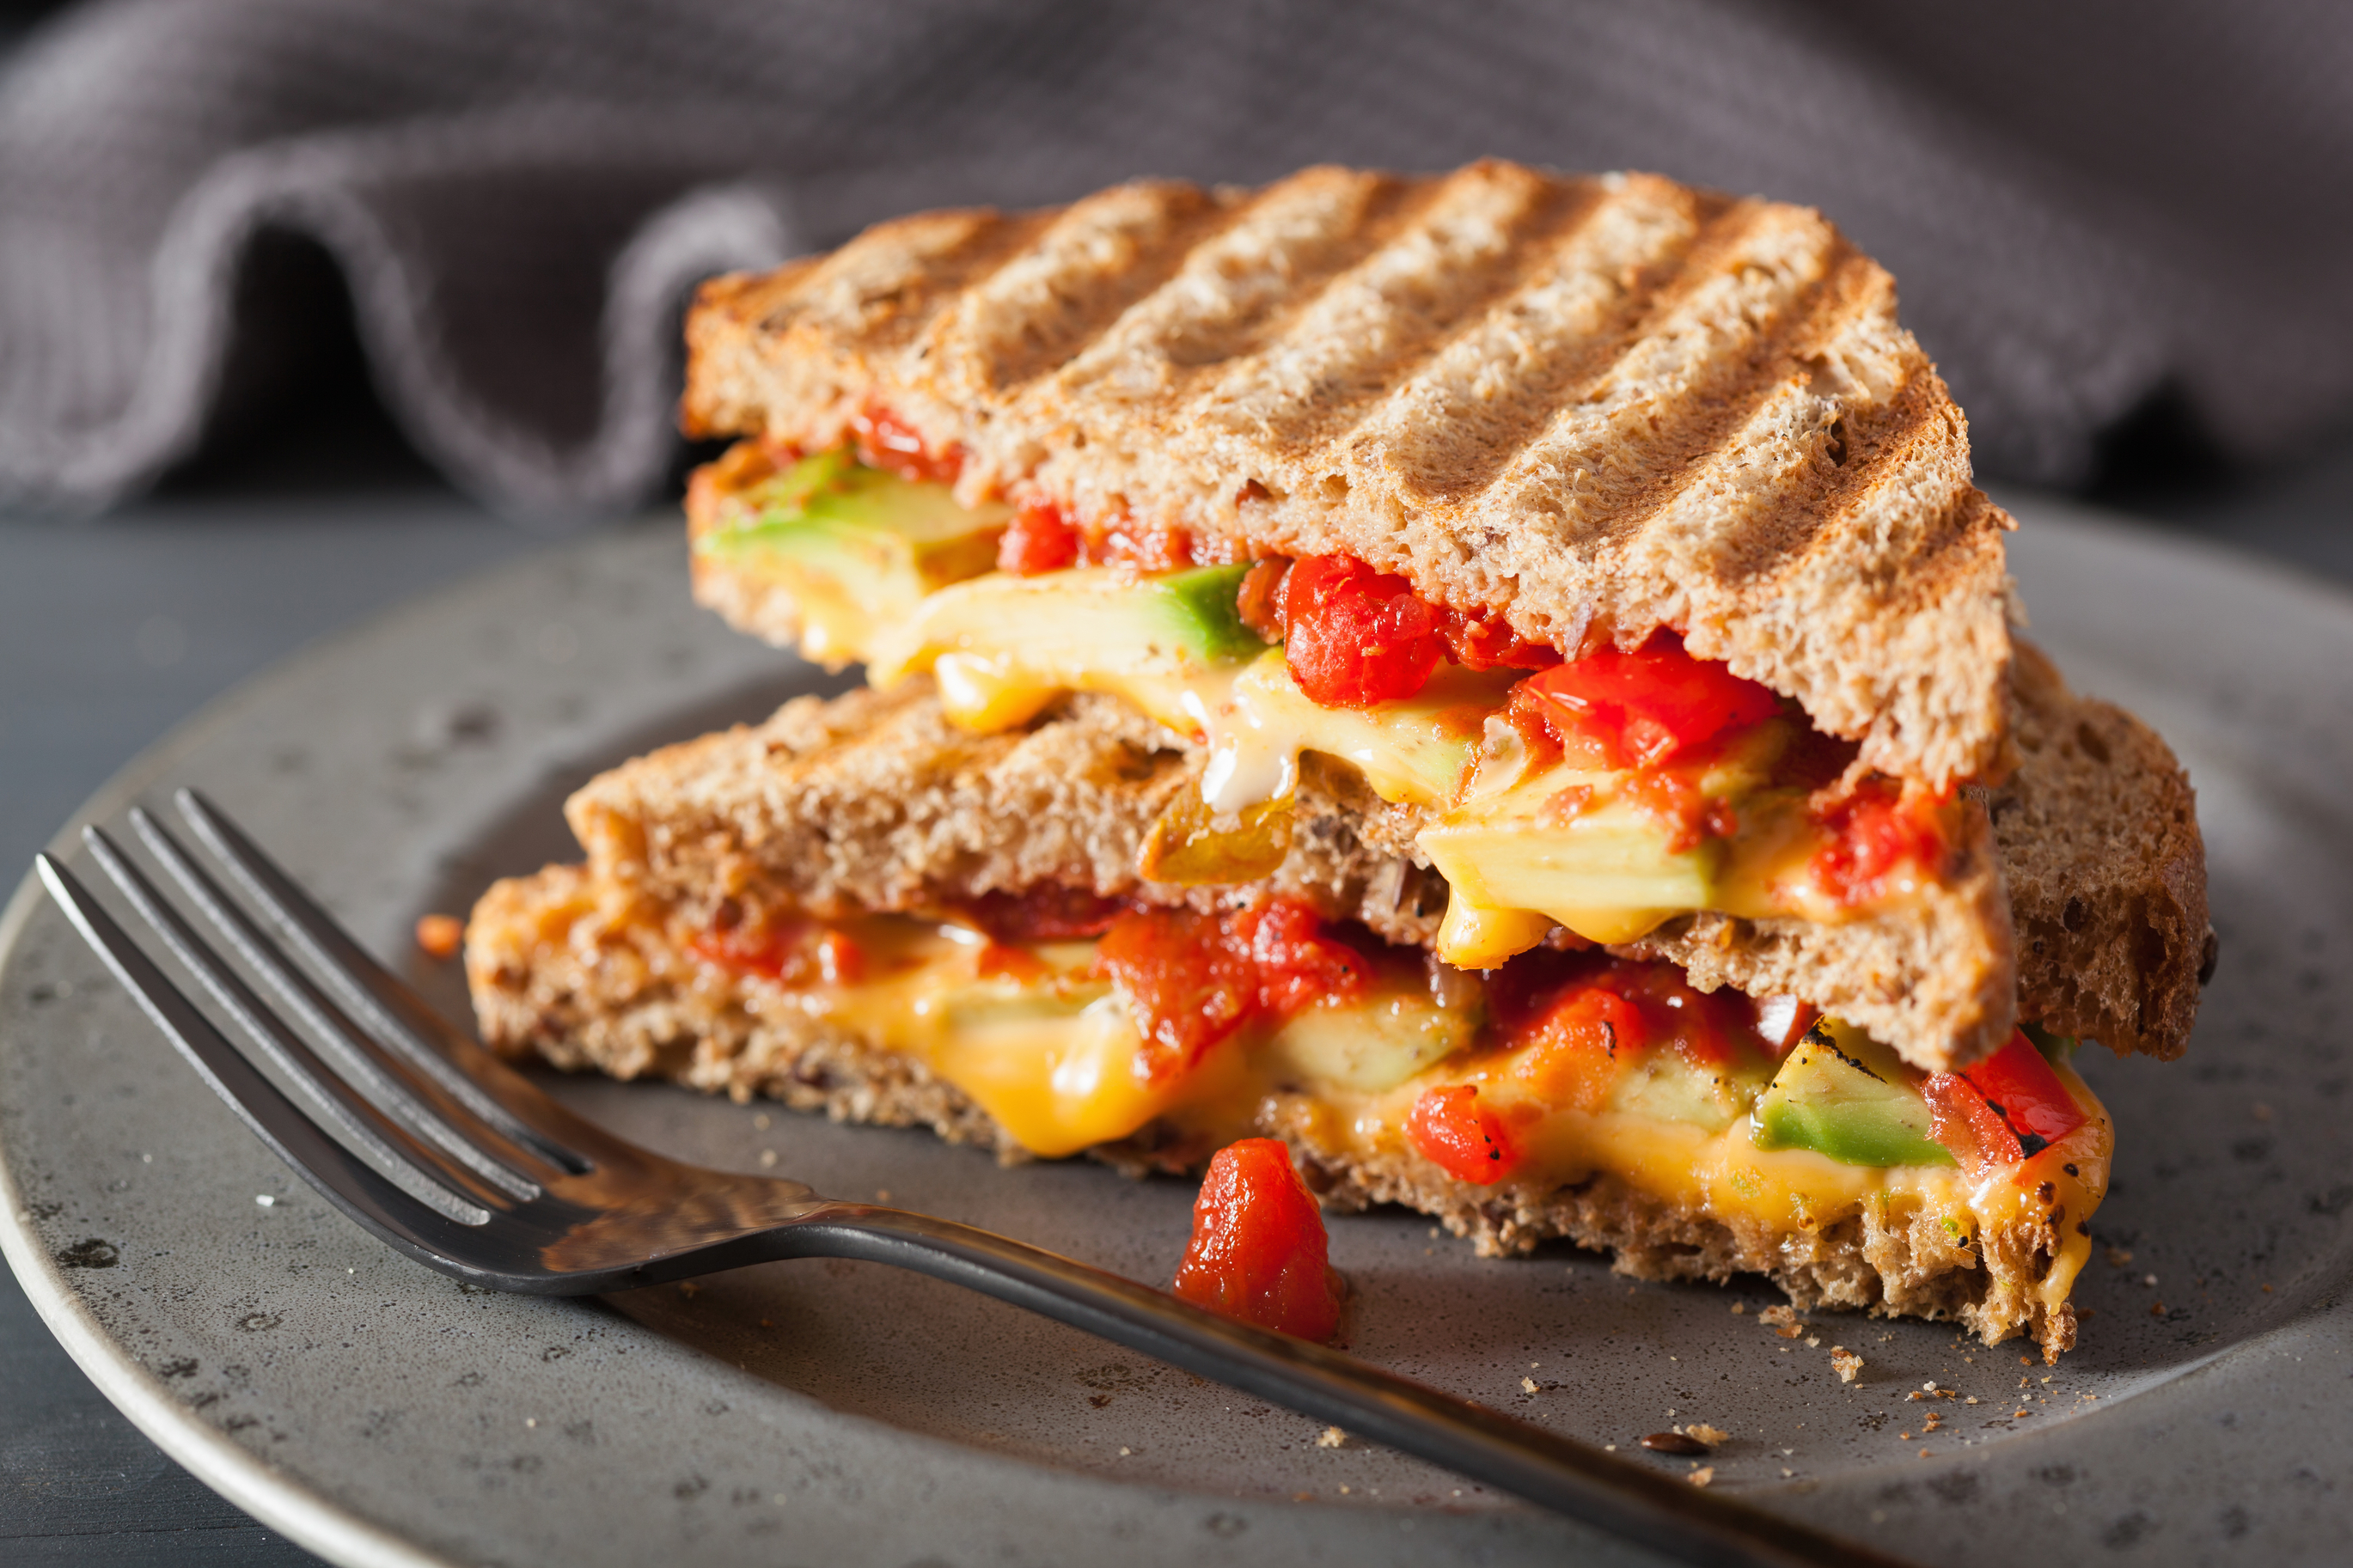 5 Tips to Host the Ultimate Grilled Cheese Party